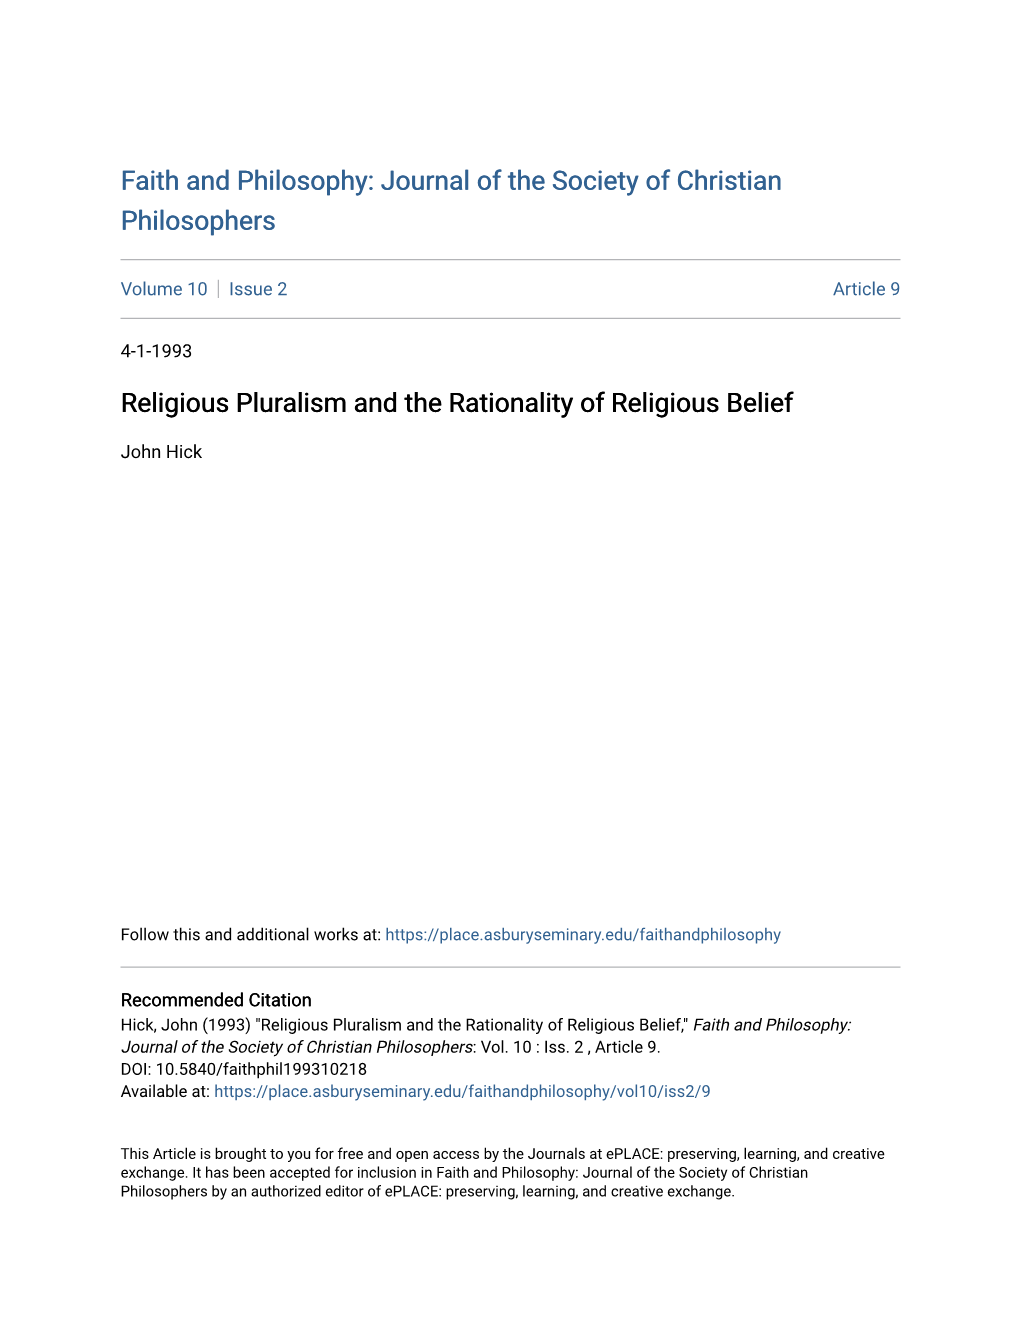 Religious Pluralism and the Rationality of Religious Belief